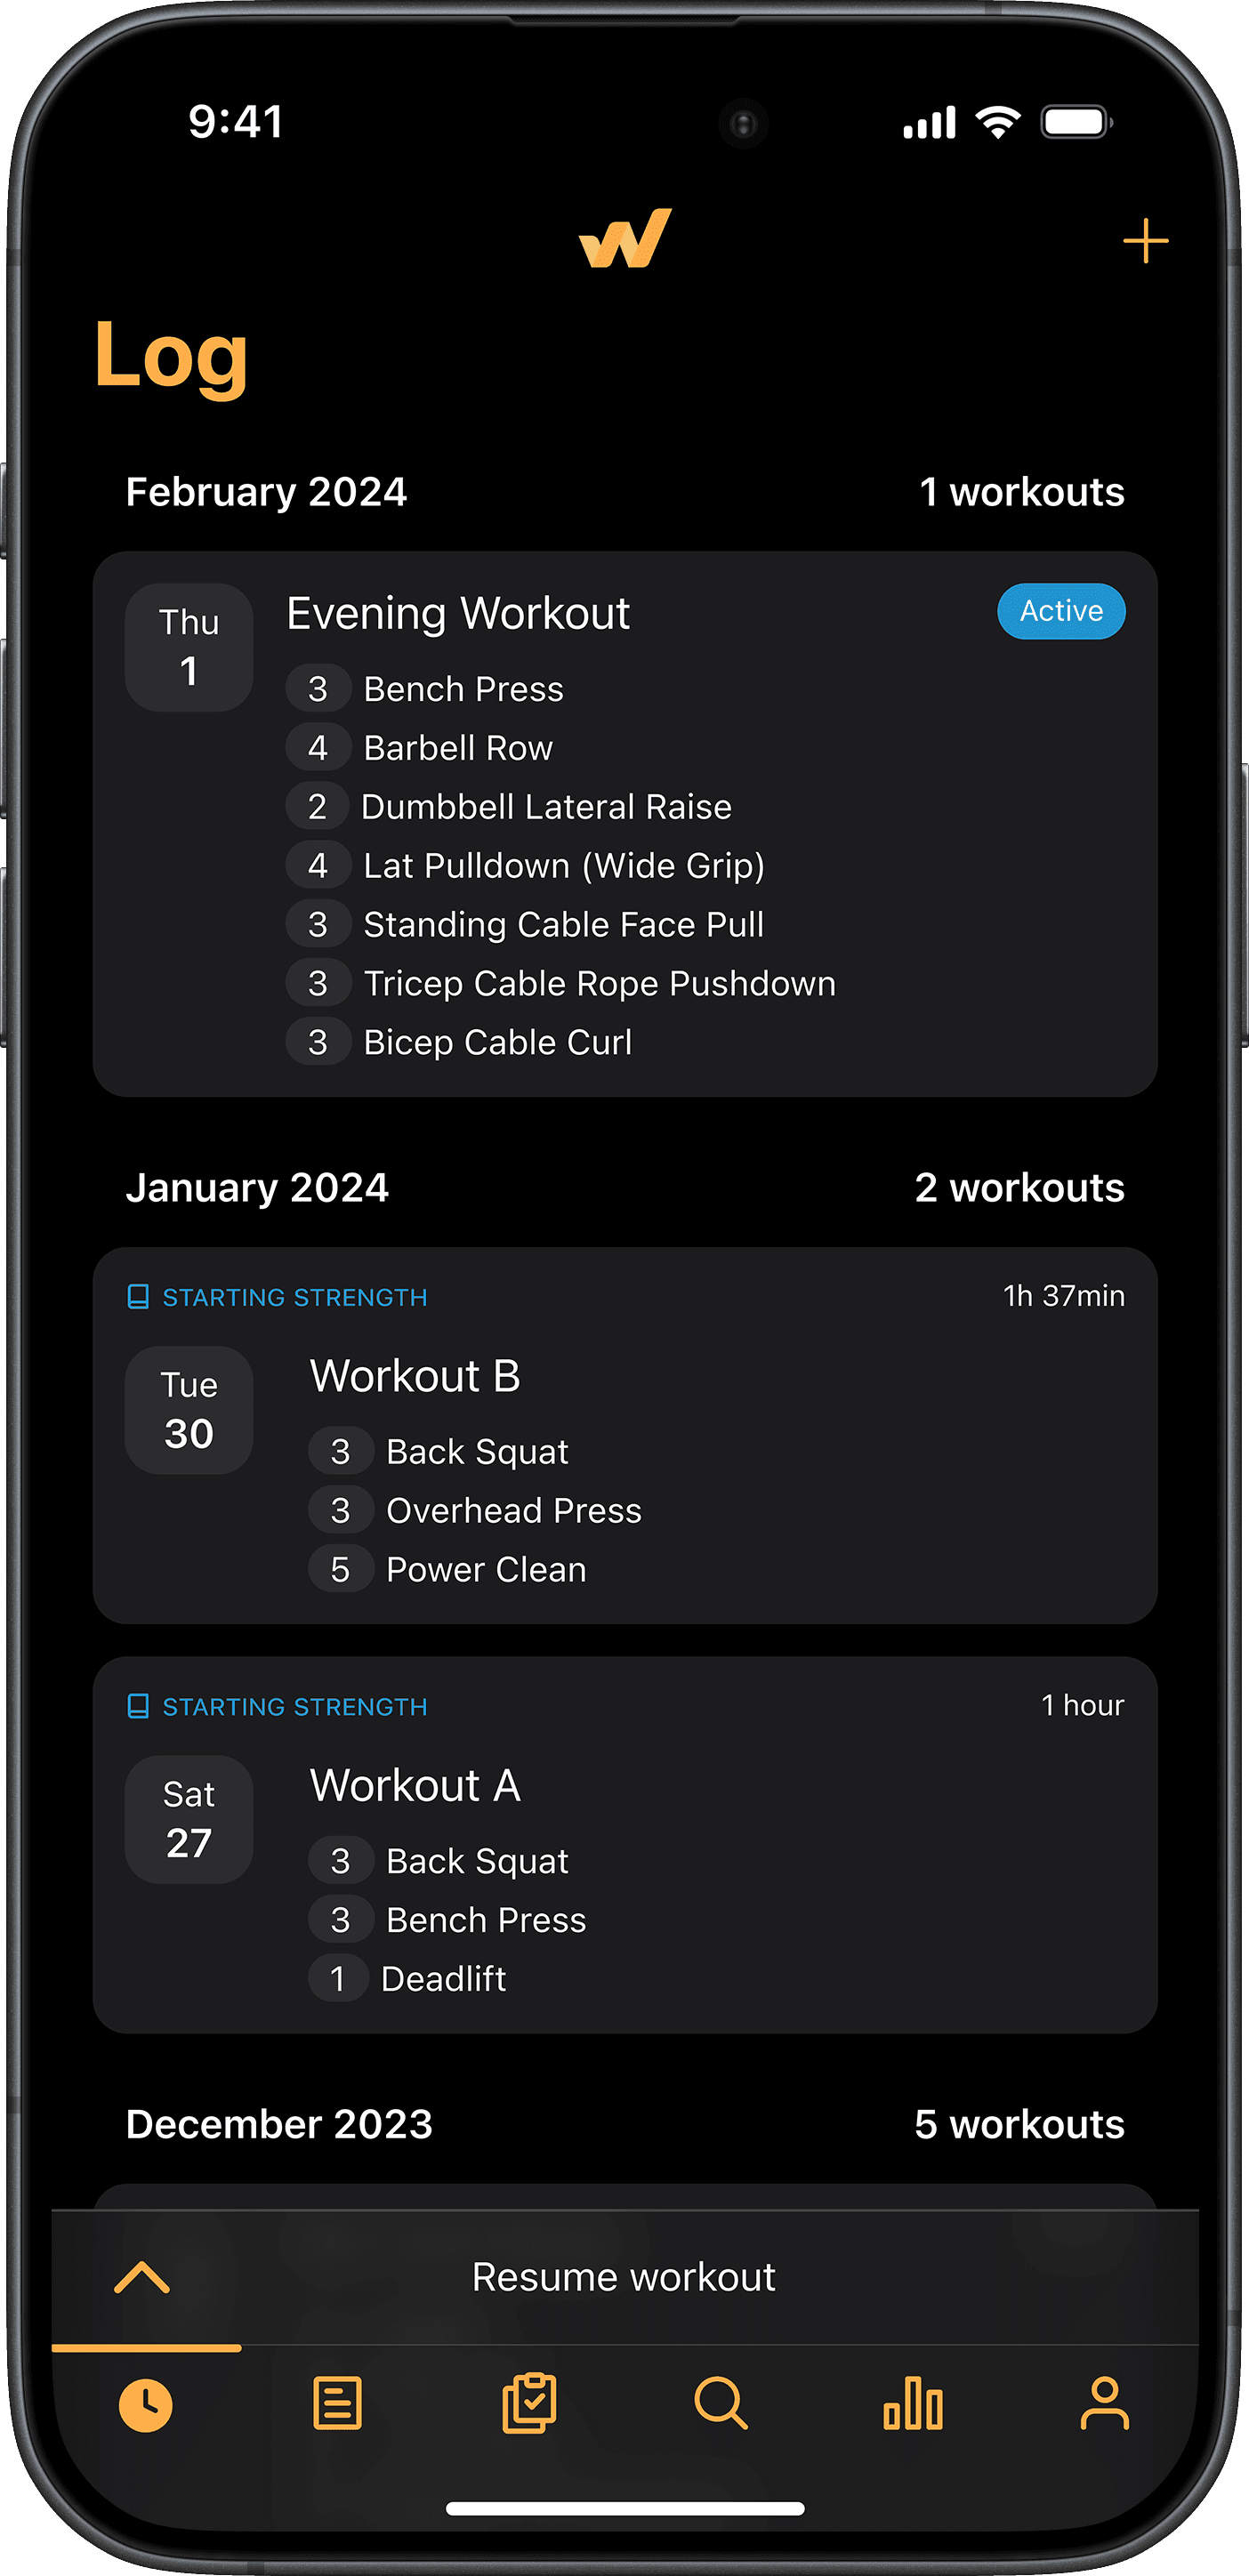 iPhone displaying the Log screen of the Wlogr app, which lists logged workouts.